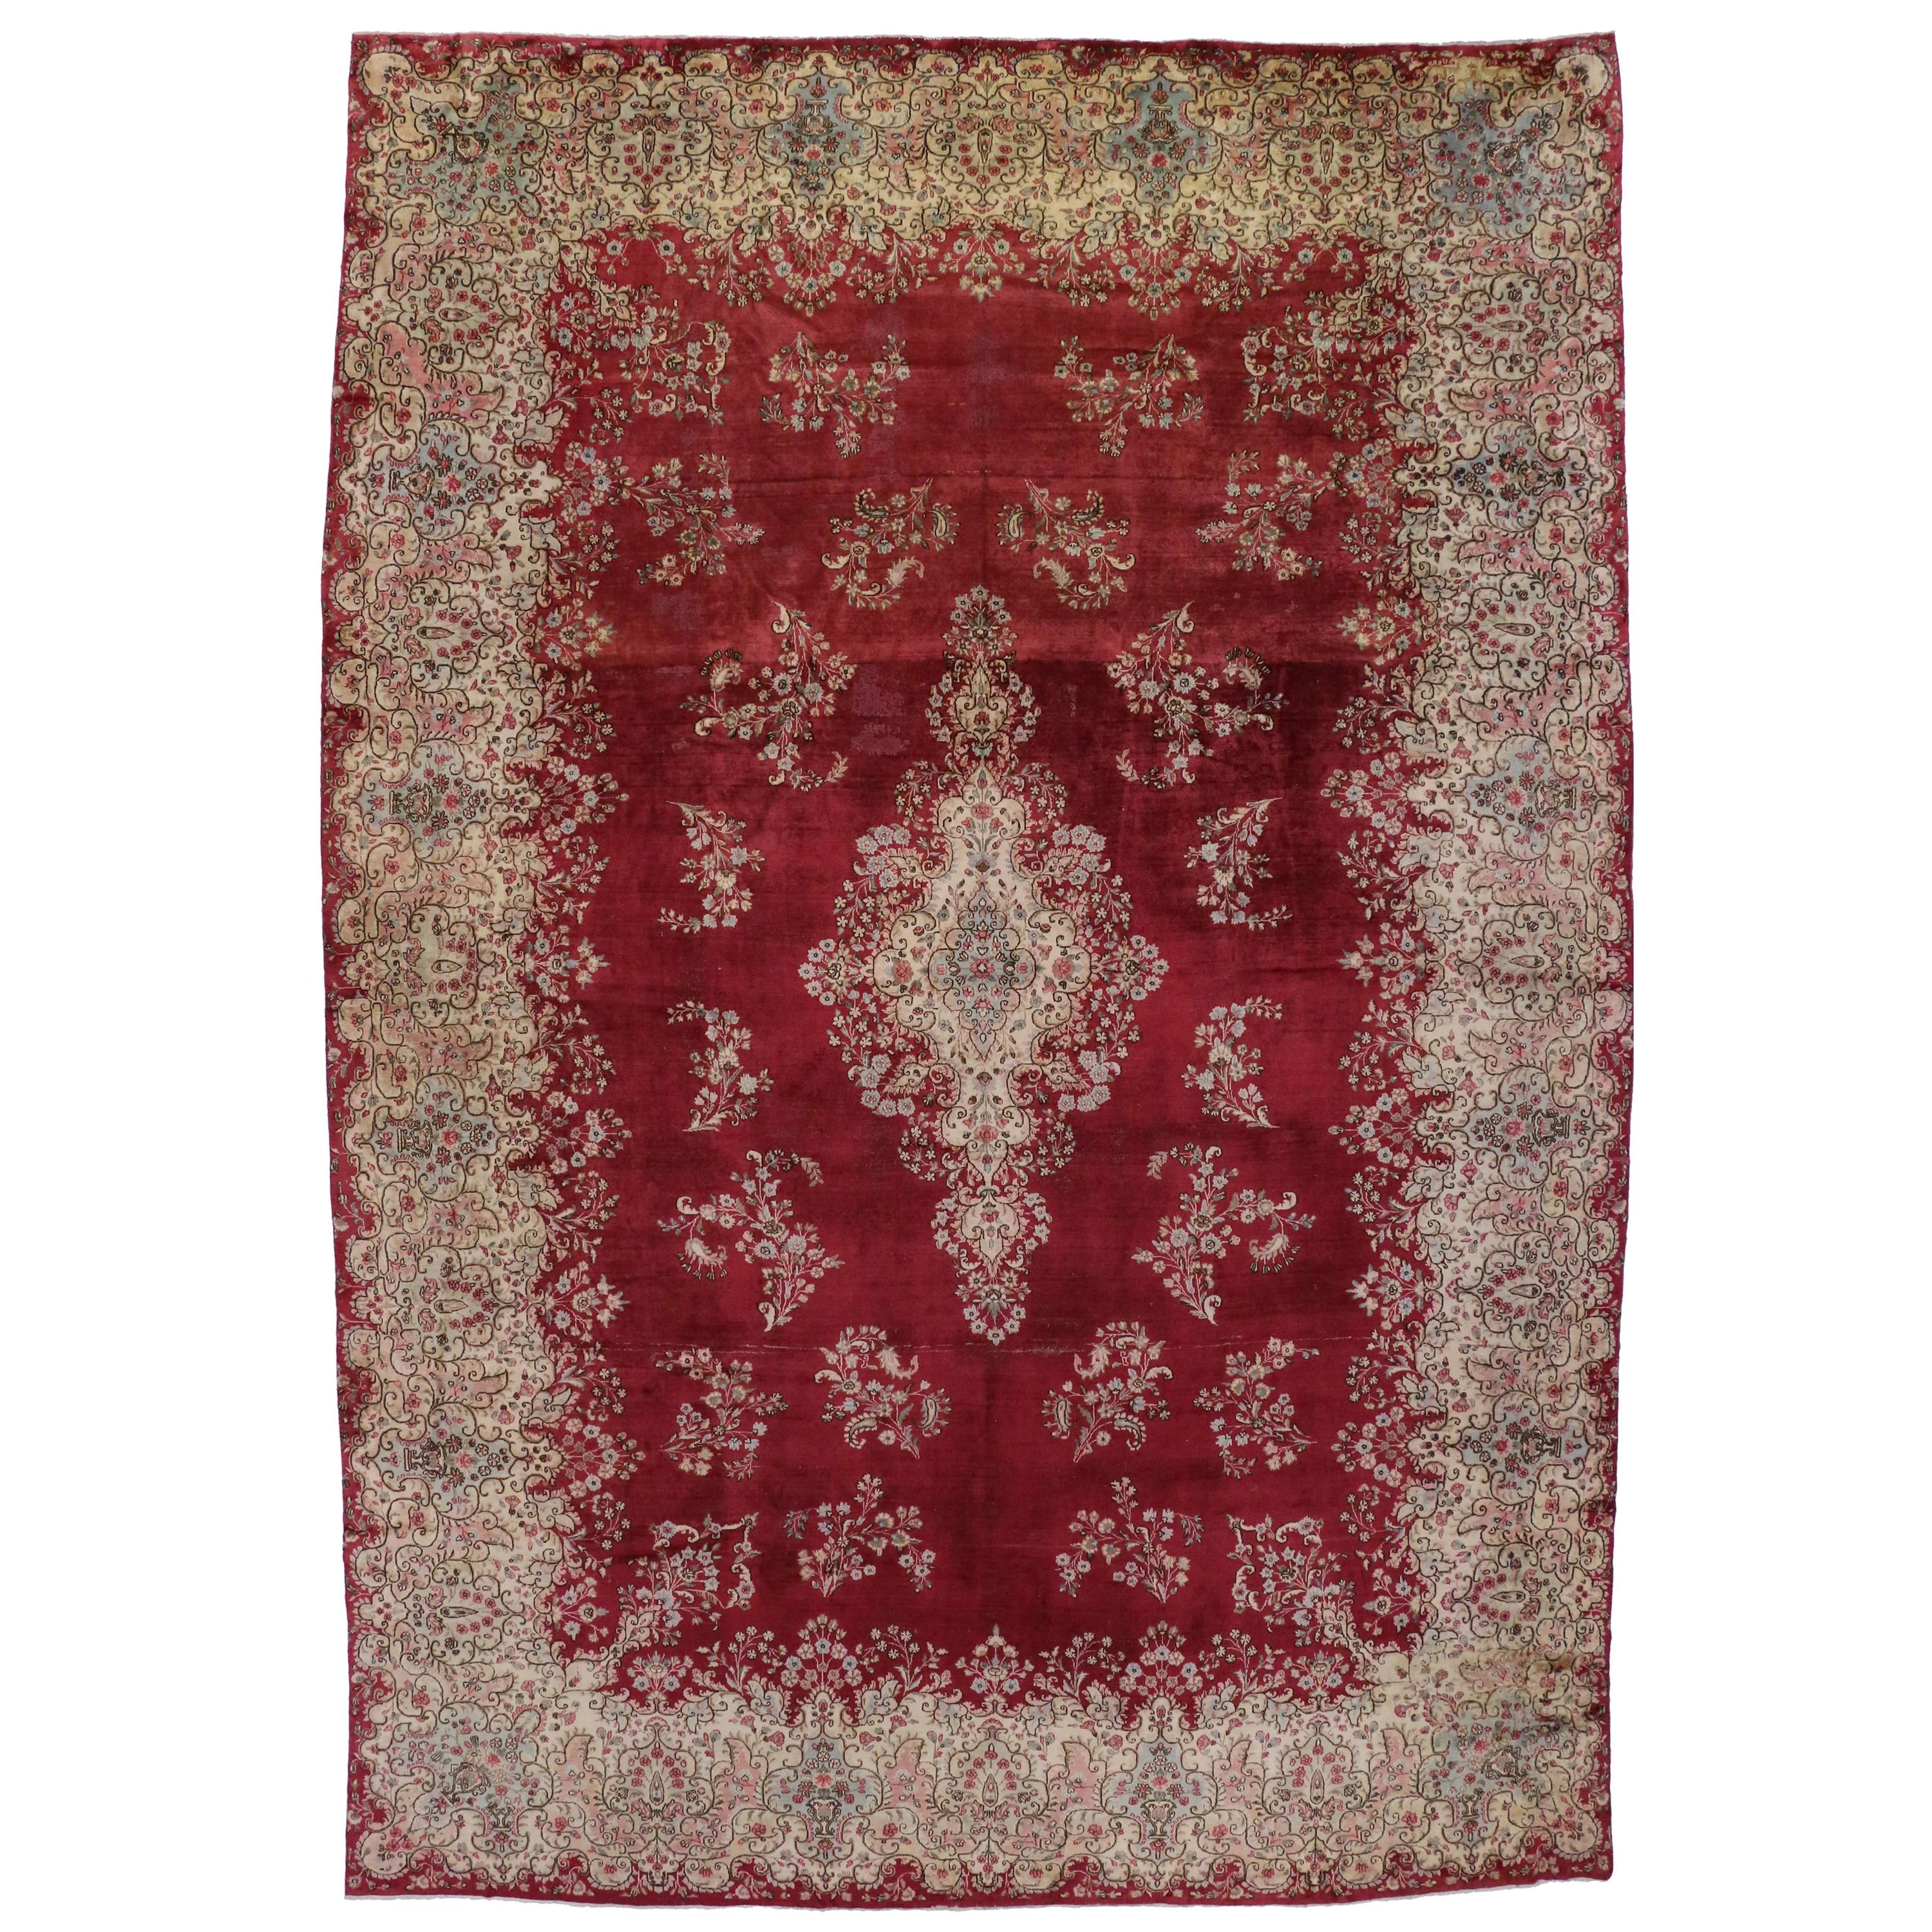 Vintage Persian Kerman Rug with Victorian Style